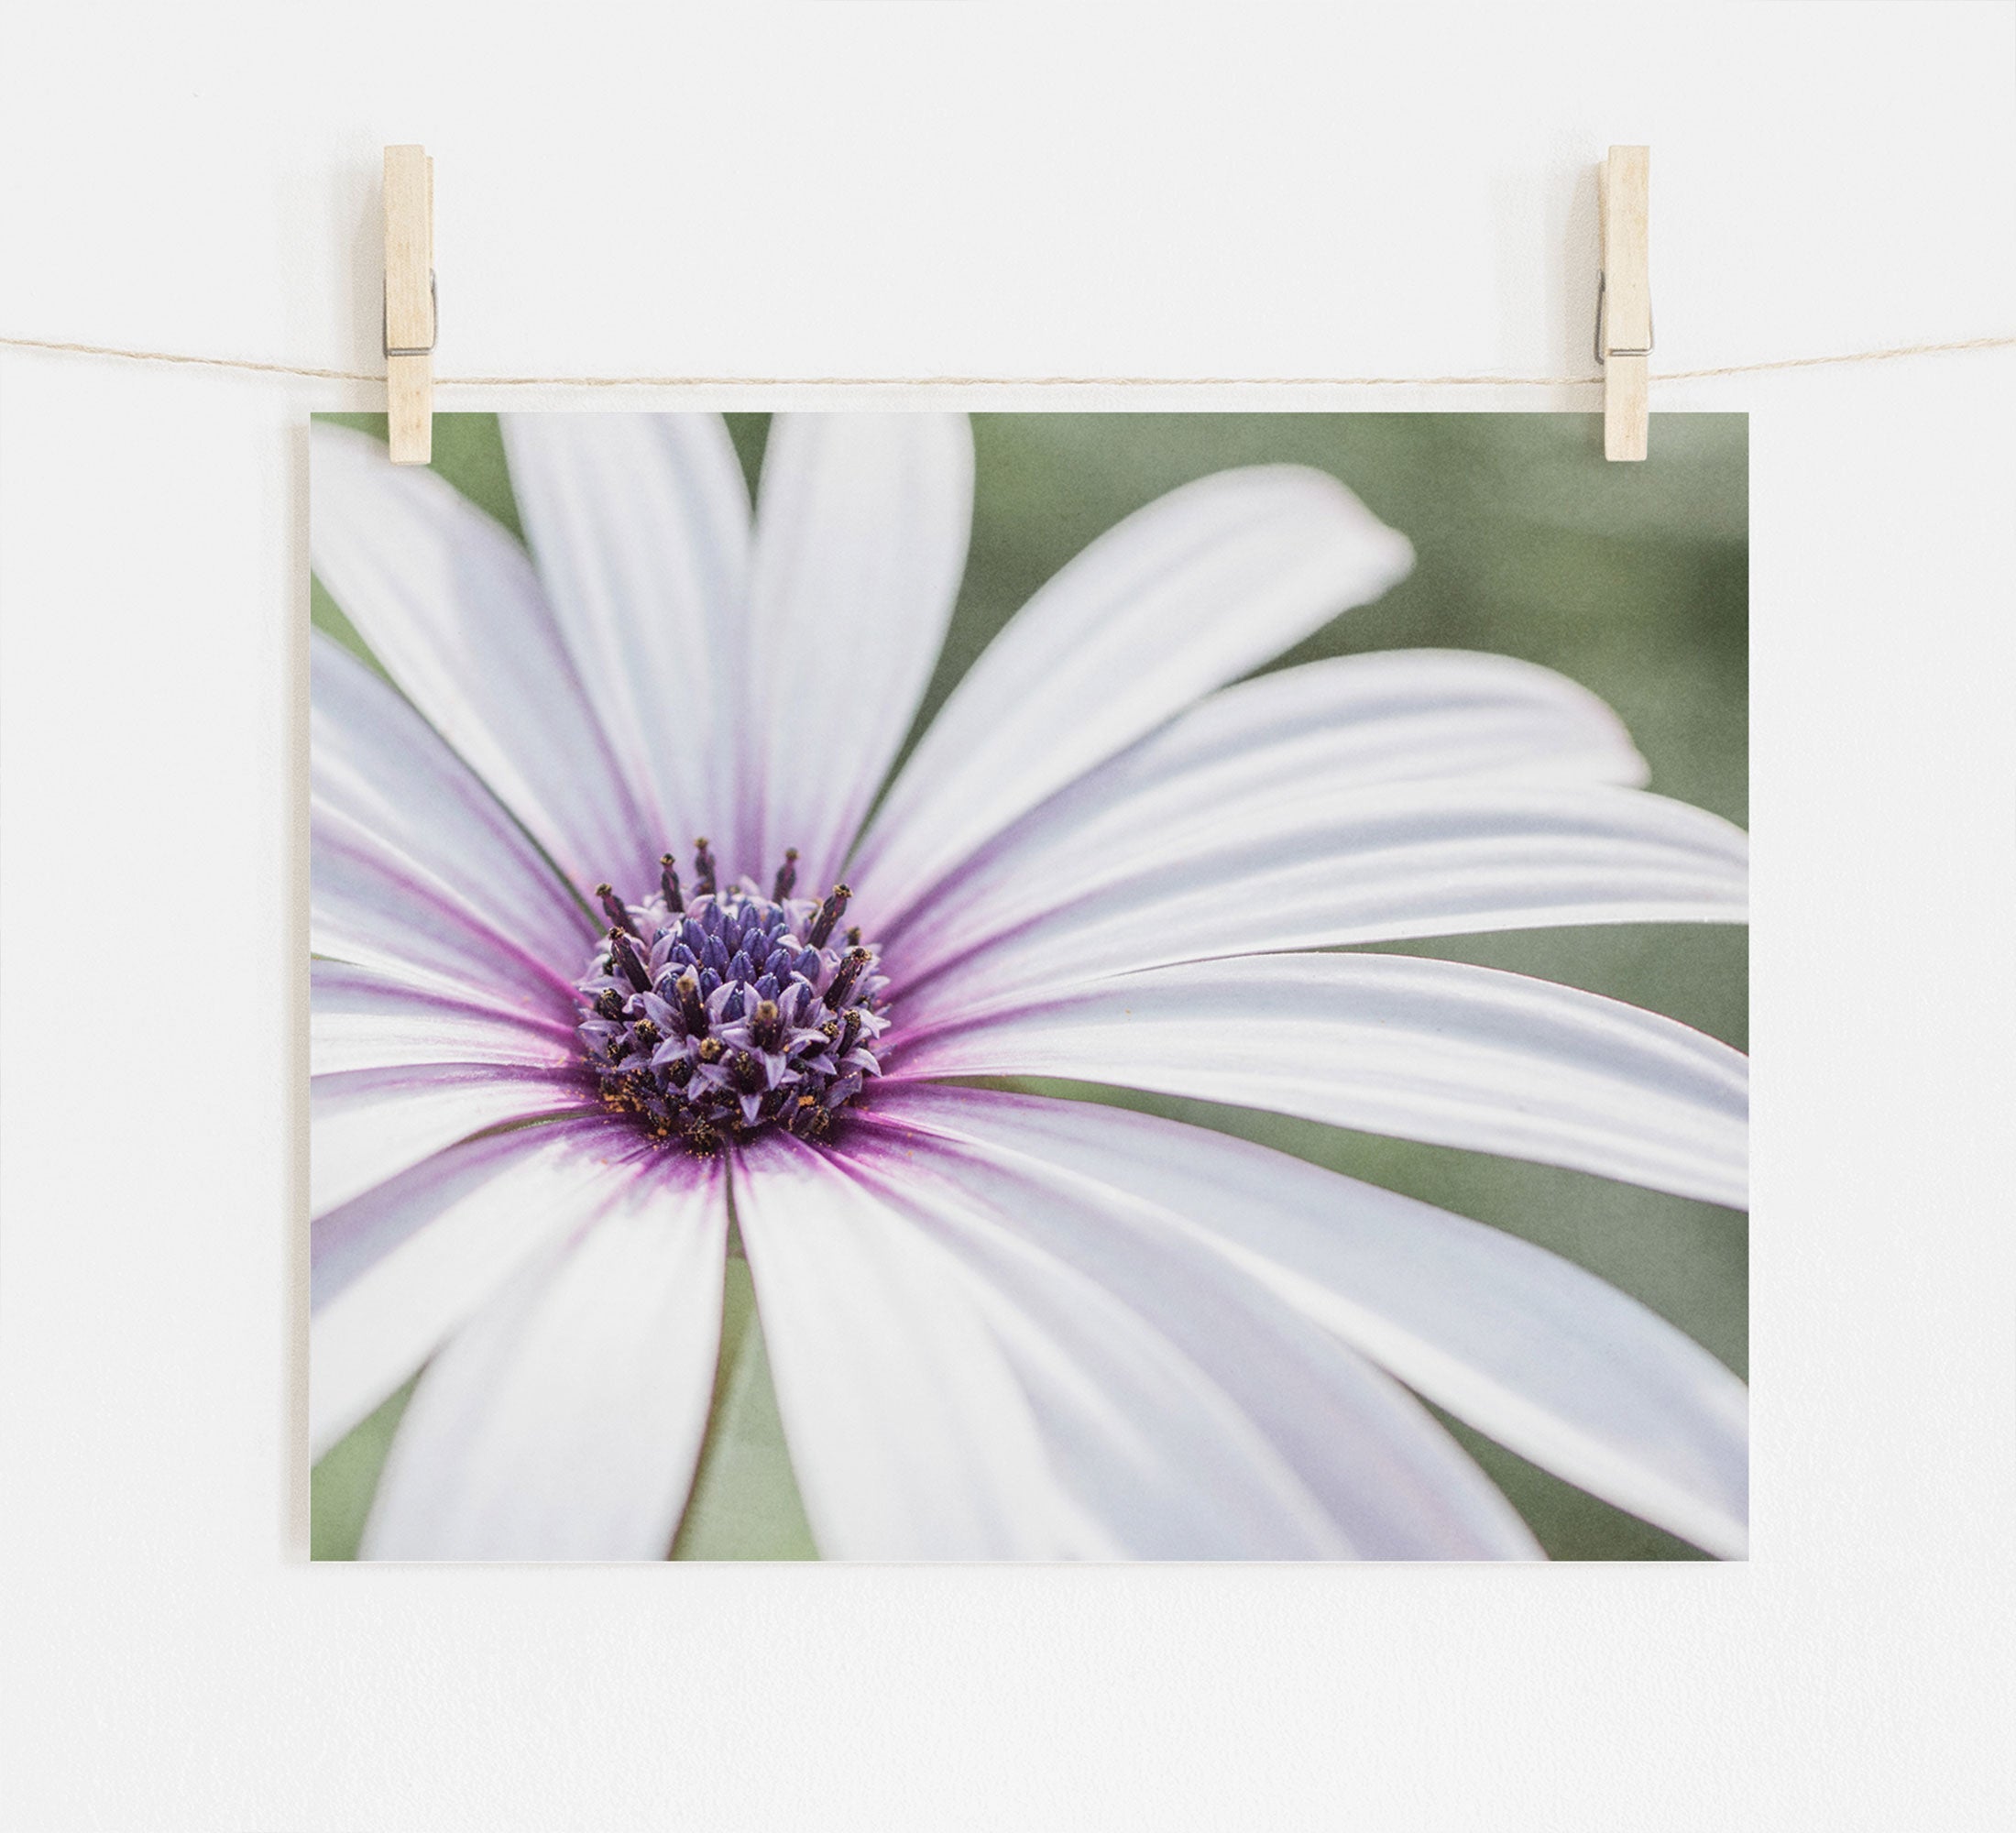 A close-up photo of a Large White Daisy Flower Print, &#39;Bed of Petals&#39;, suspended by clothespins on a string against a soft white background, captured using archival photographic paper by Offley Green.